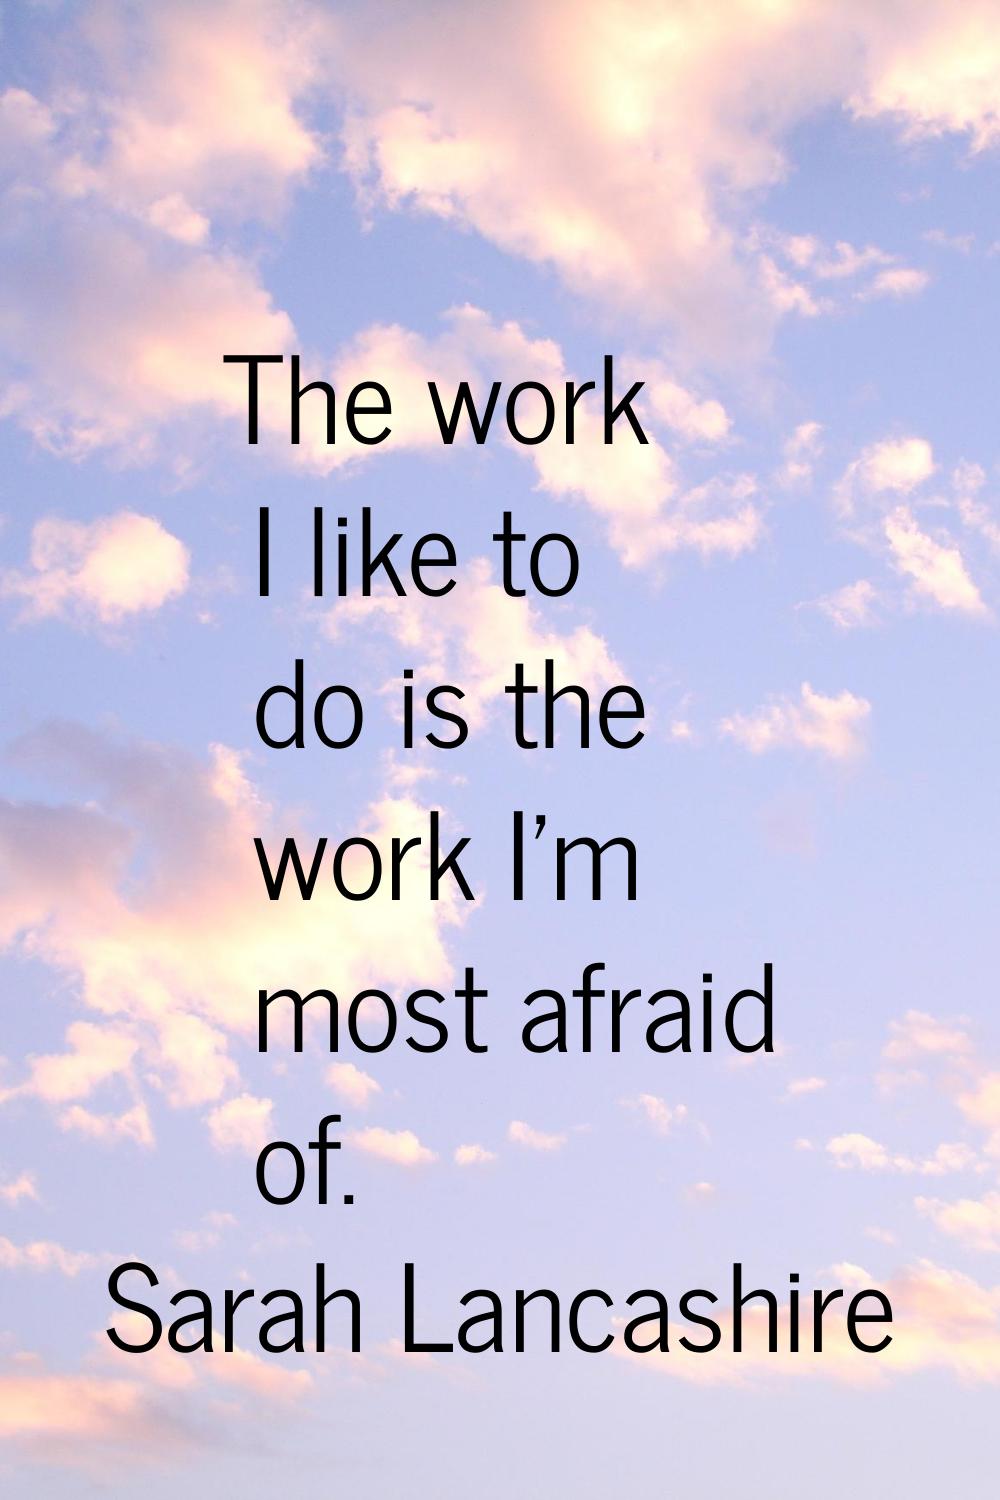 The work I like to do is the work I'm most afraid of.